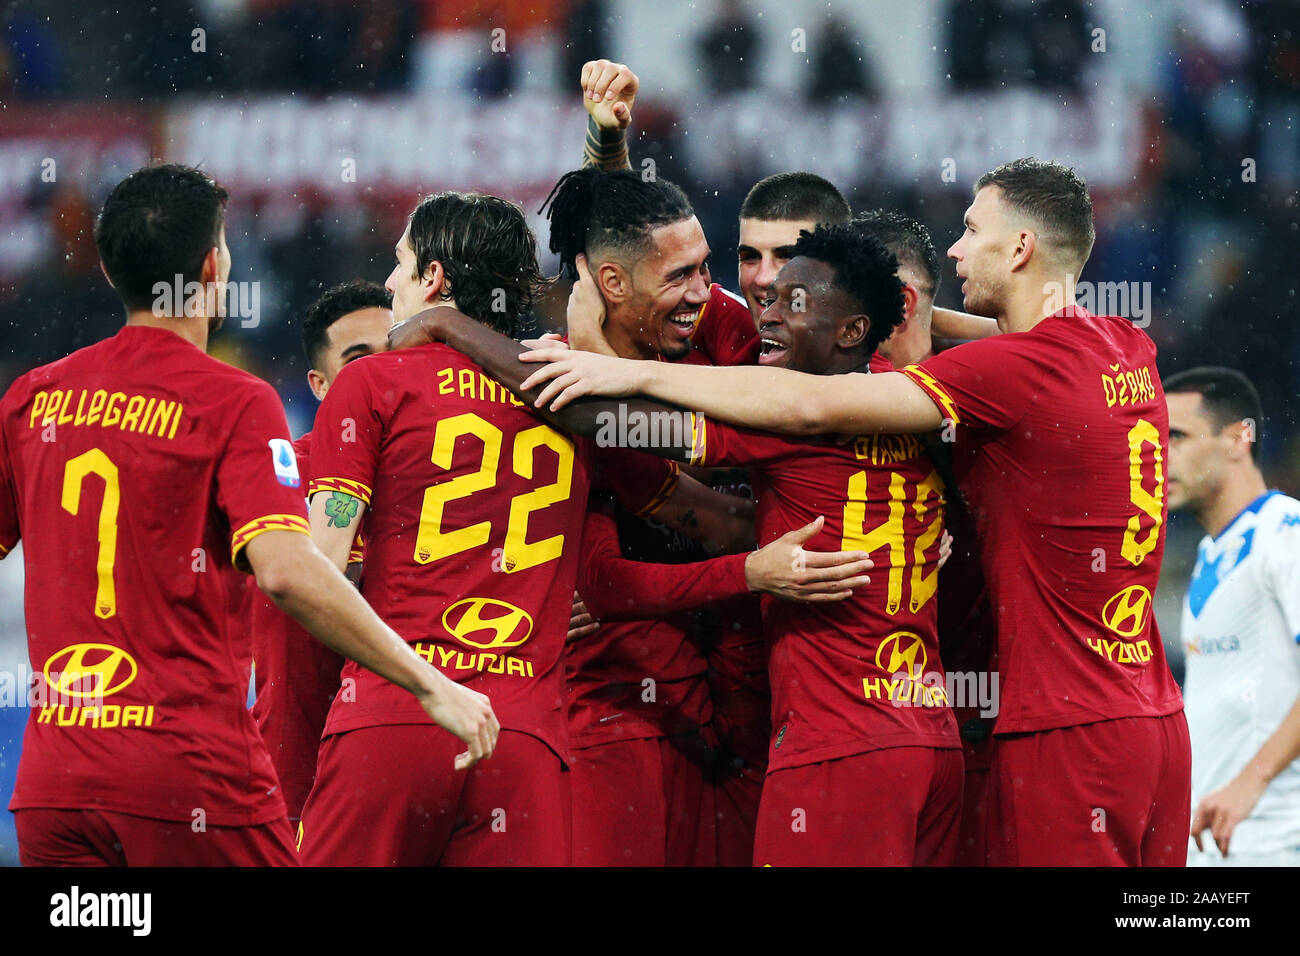 Rome Italy 24th Nov 2019 Chris Smalling Of Roma Celebrates With His Teammates After Scoring 1 0 Goal During The Italian Championship Serie A Football Match Between As Roma And Brescia Calcio On